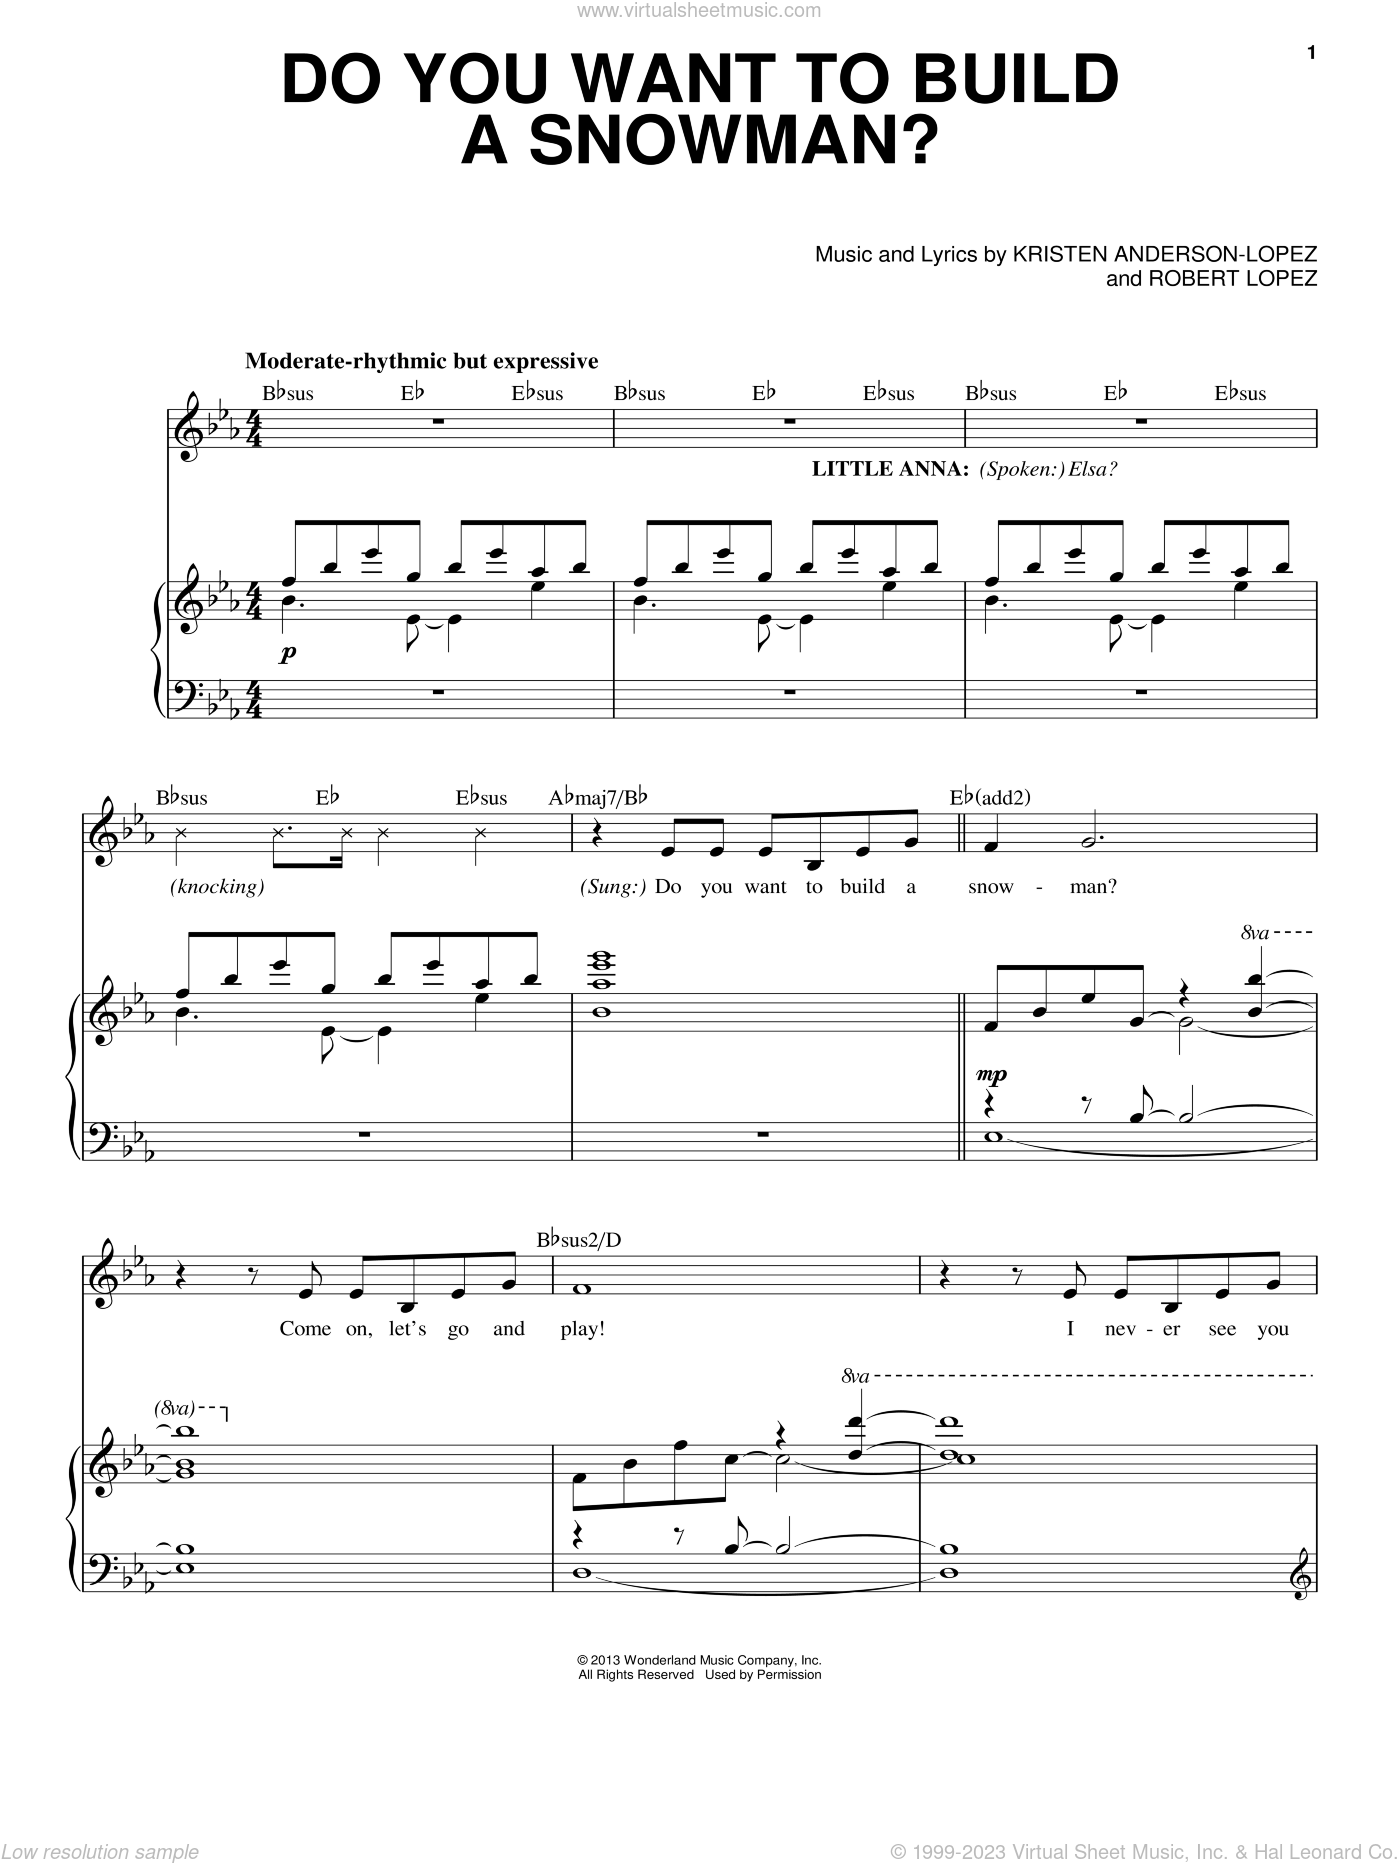 Do You Want to Build a Snowman Sheet music for Piano (Solo)